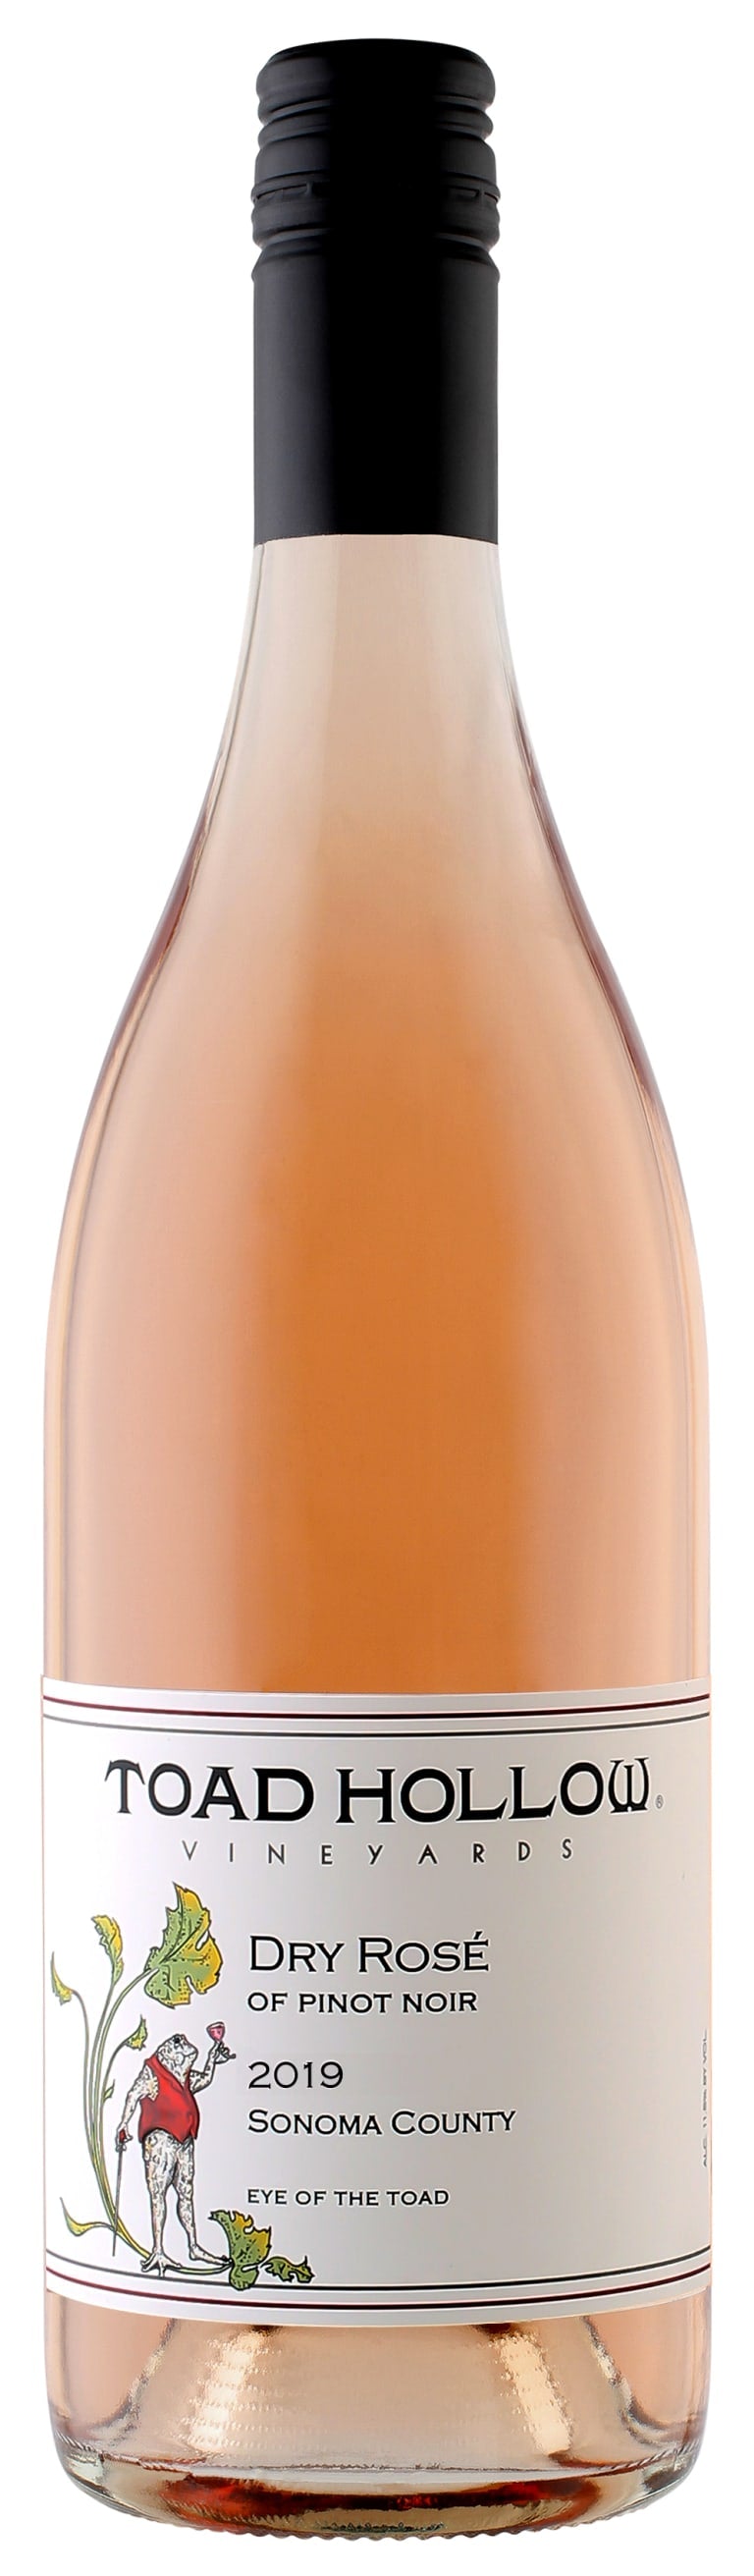 Toad Hollow Pinot Noir Rose Dry Eye Of The Toad 2019